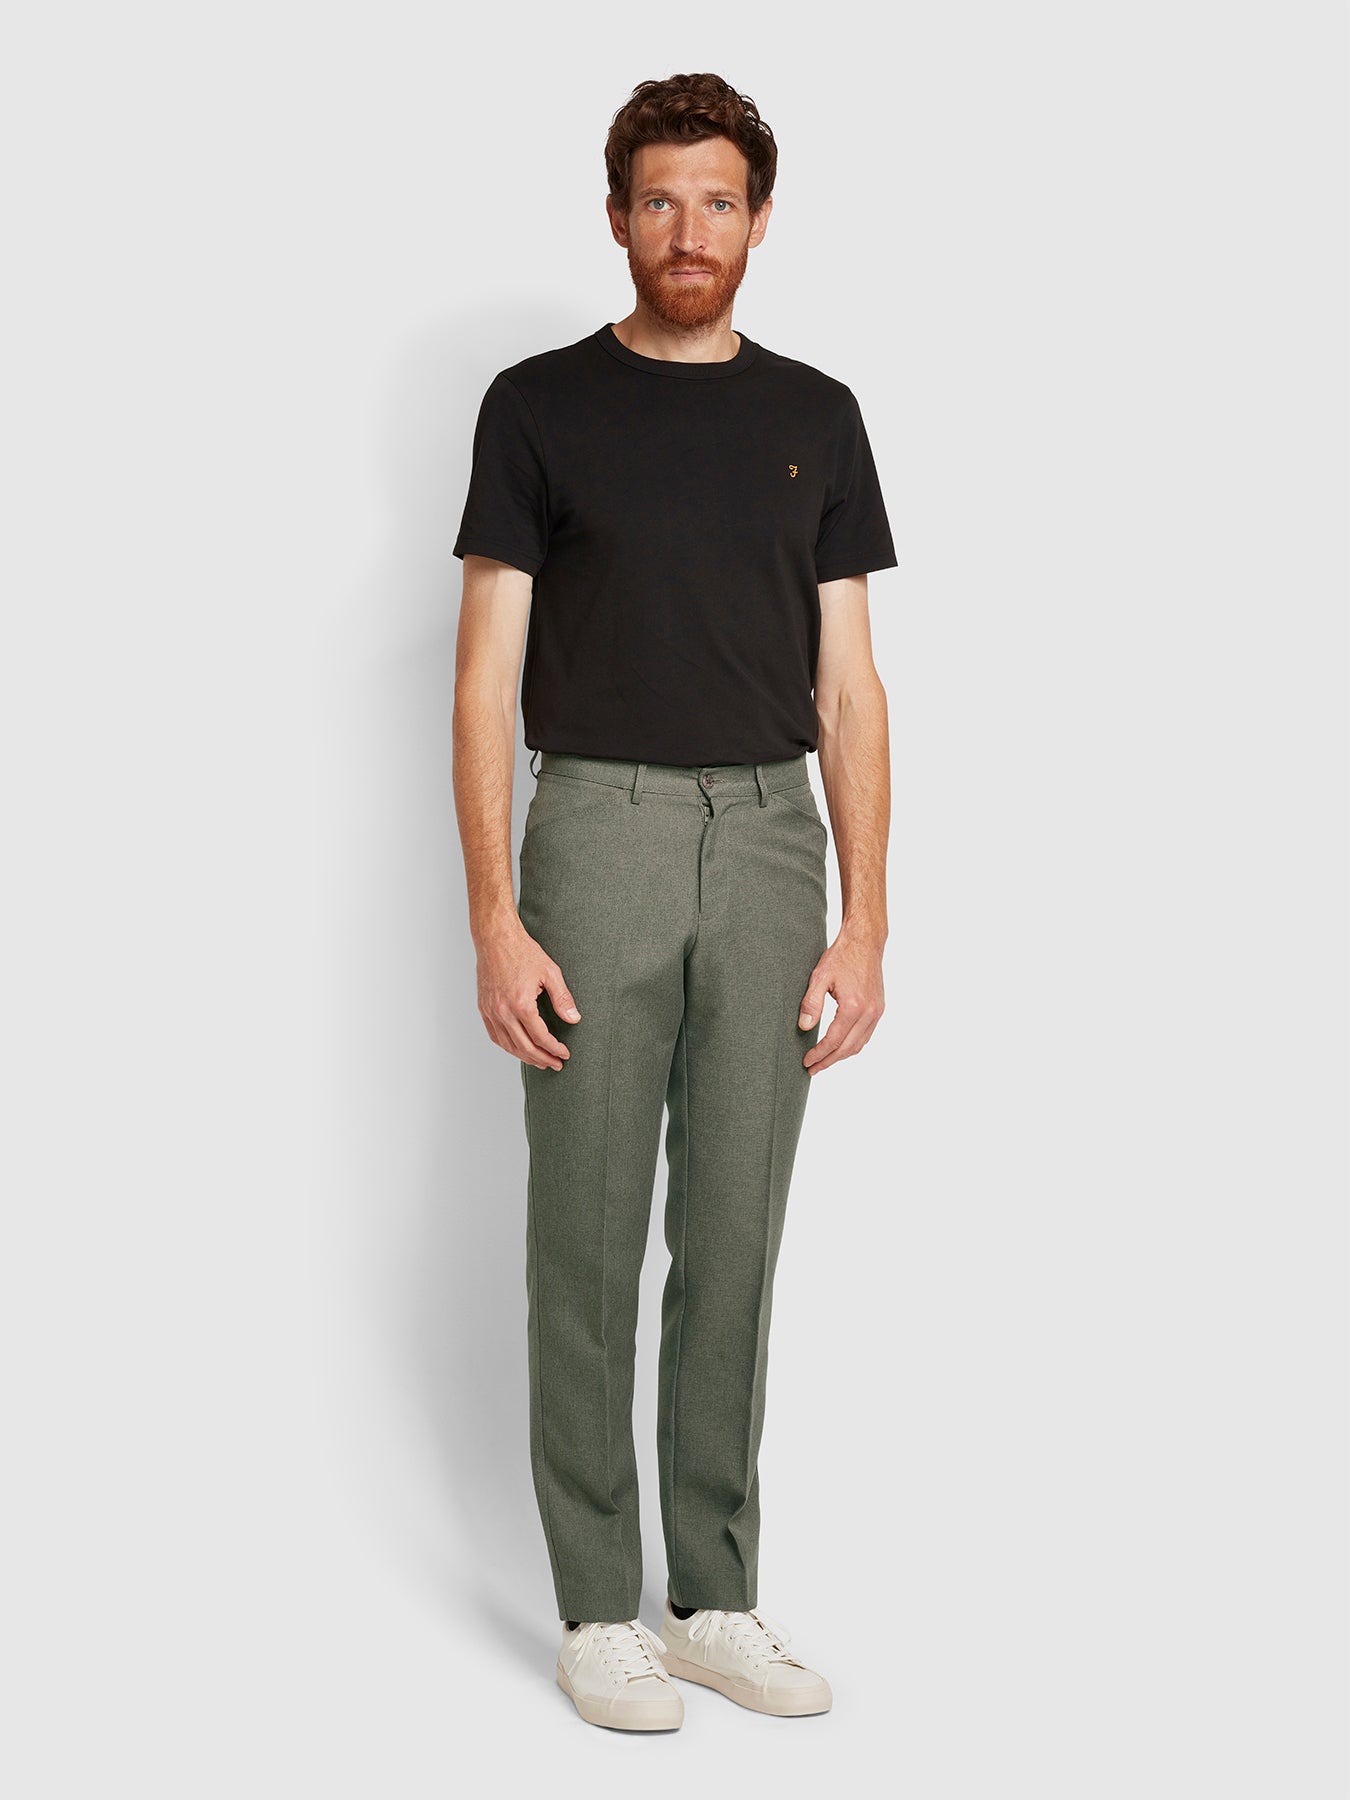 View Roachman Anti Stain Twill Trousers In Brown Marl information